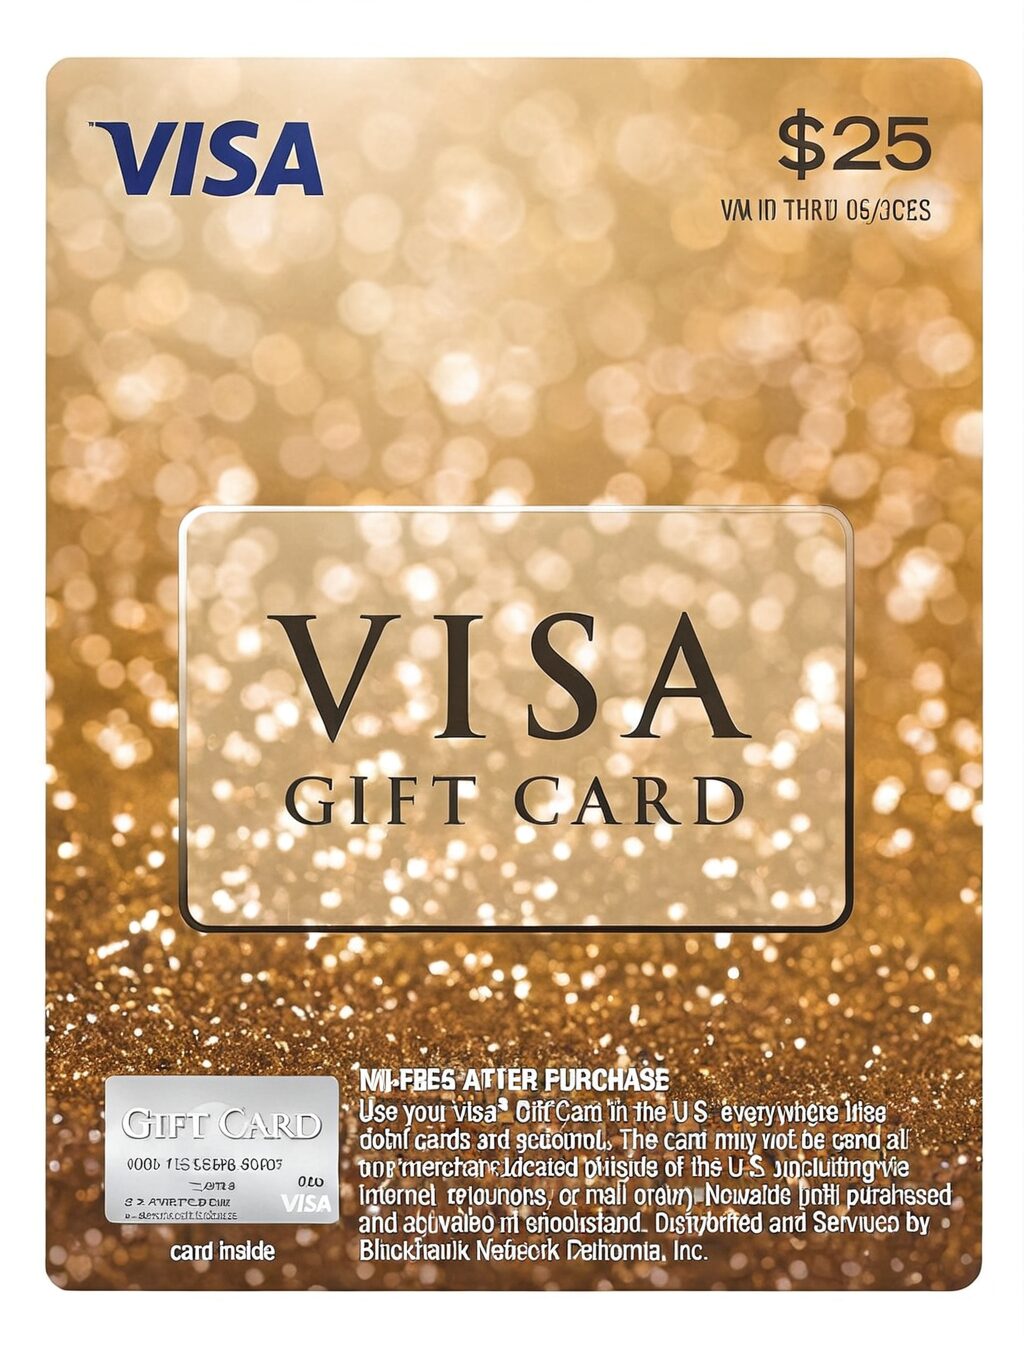 can you use a us visa gift card in japan